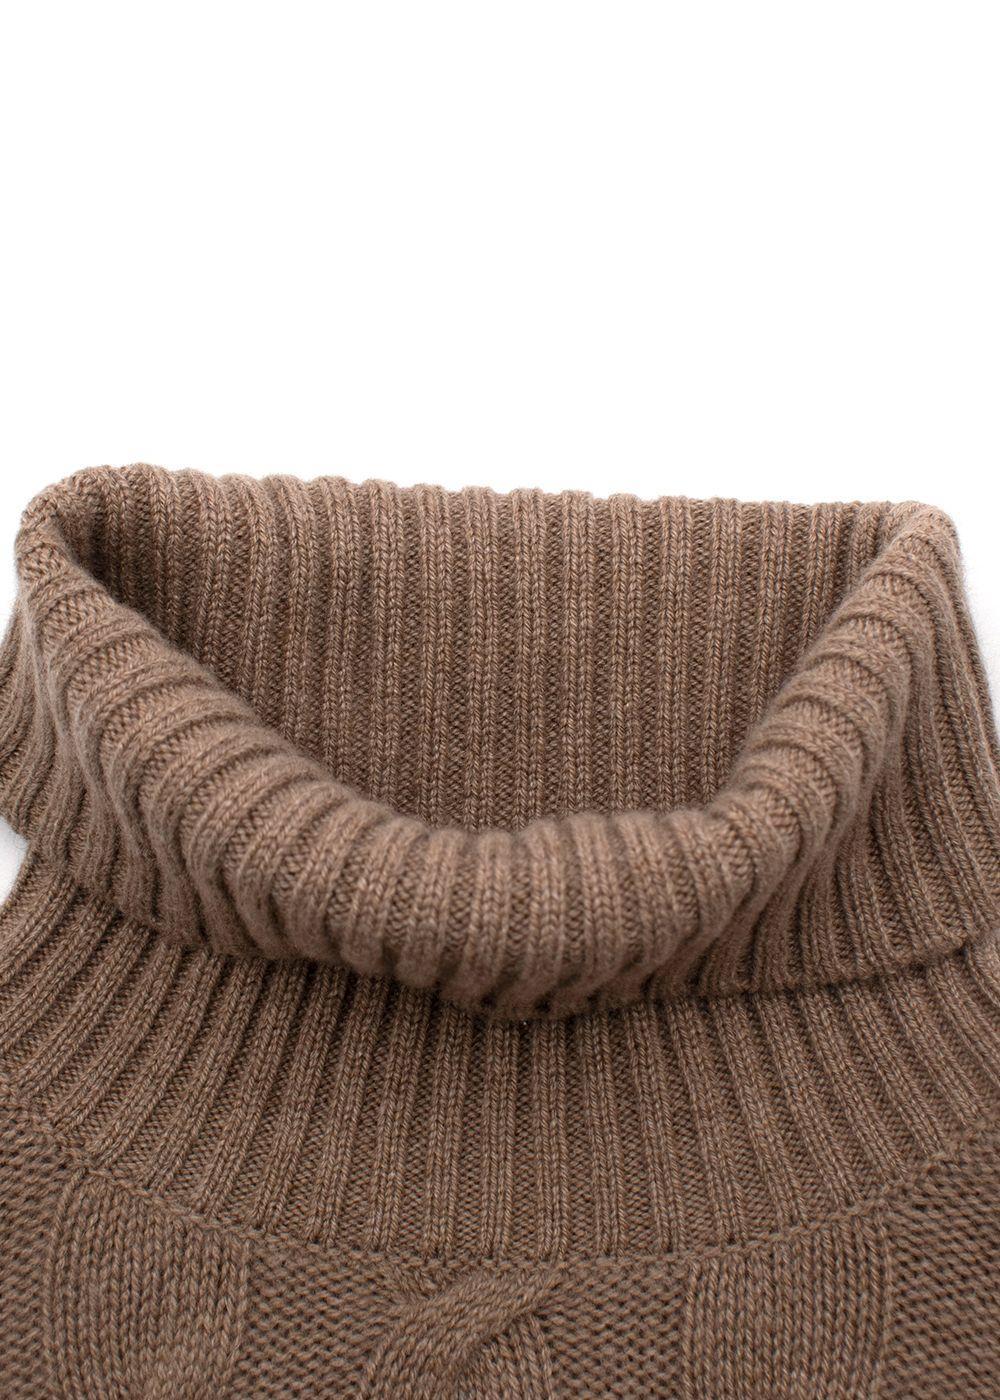 brown cable knit sweater